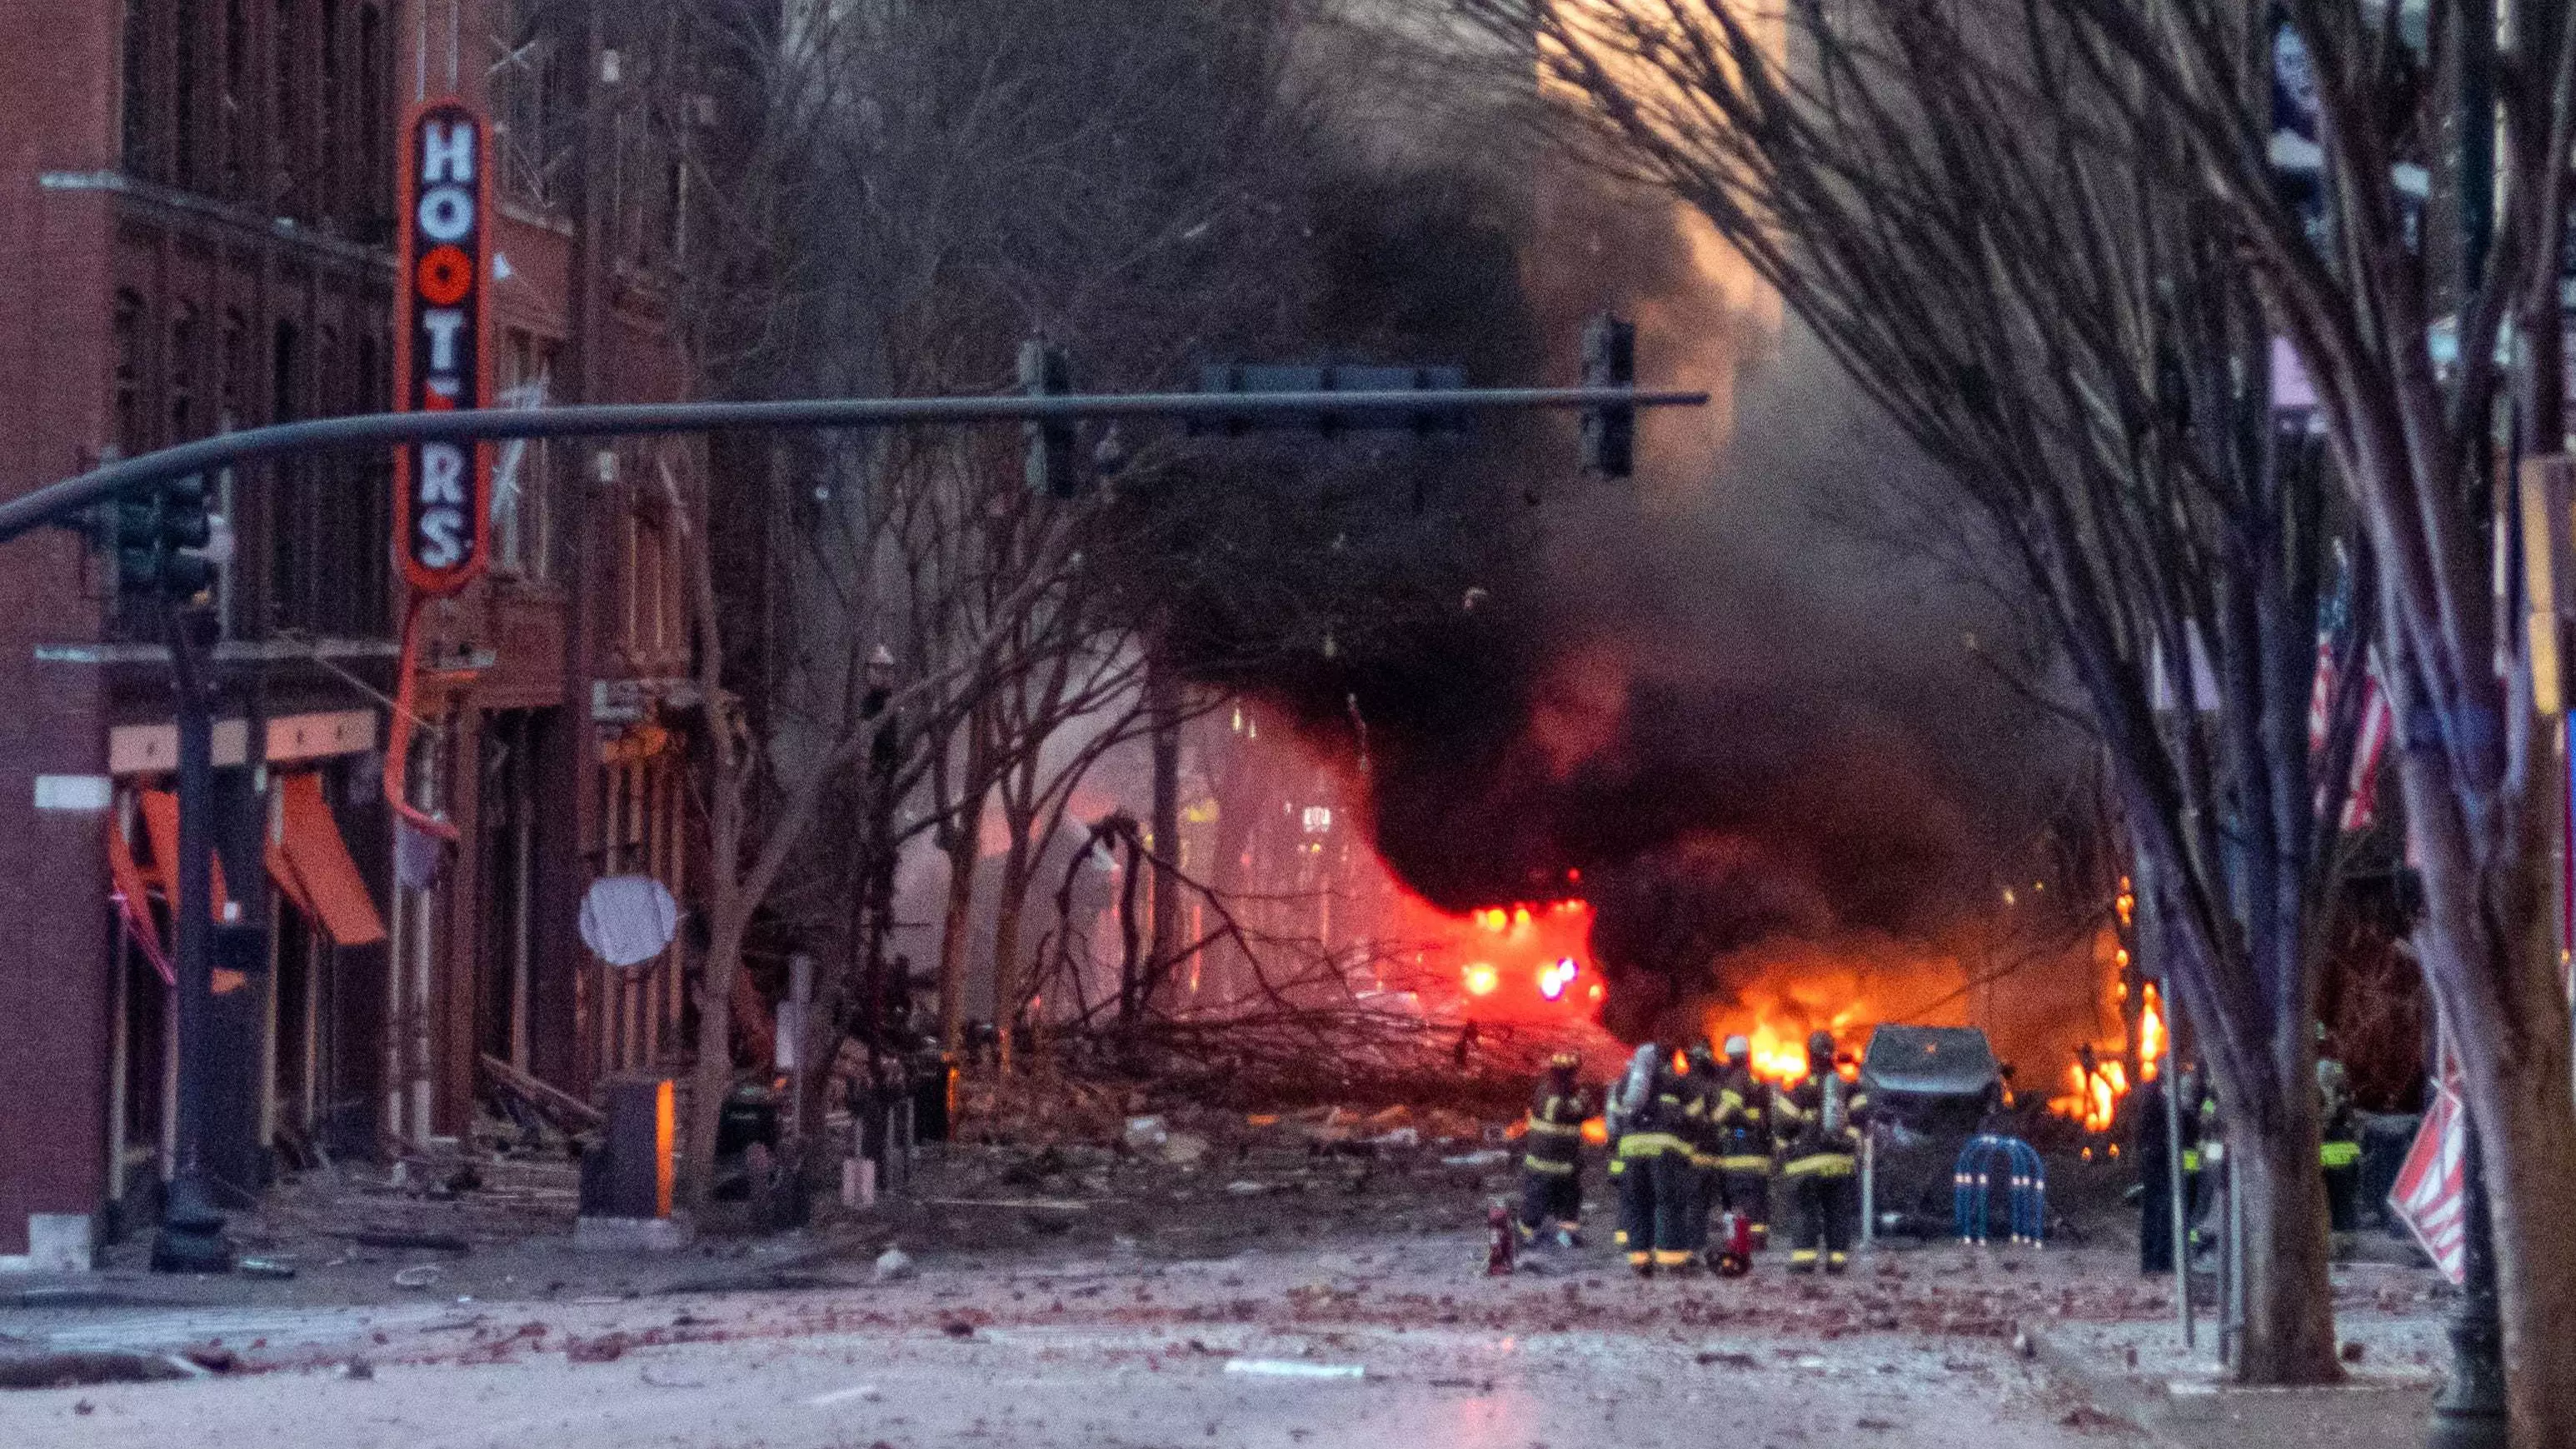 RV Explodes In Deserted Street In Downtown Nashville After Issuing Eerie Warning